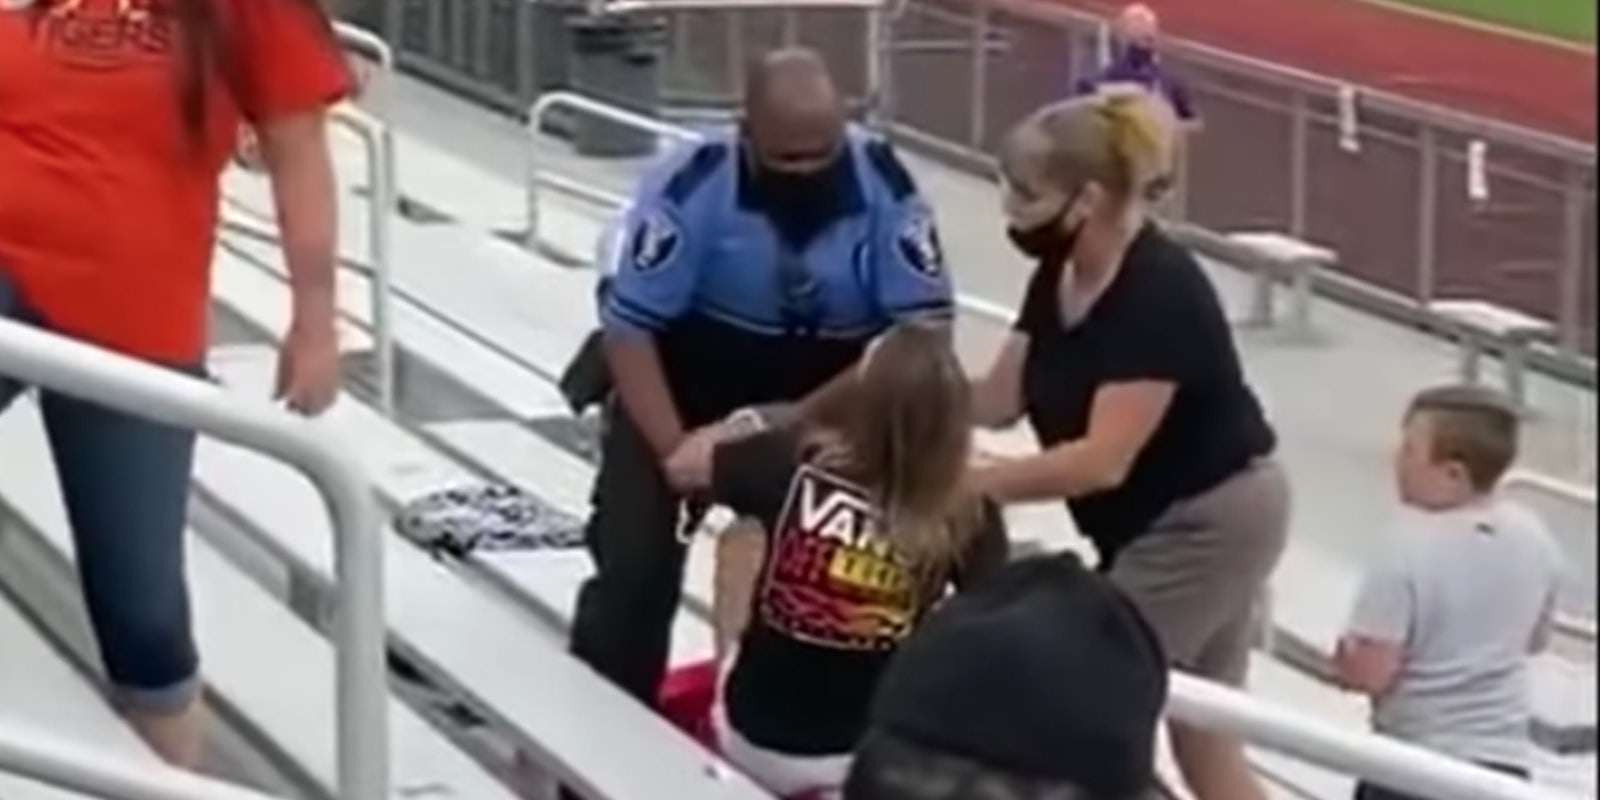 A police officer arresting a woman for not wearing a mask